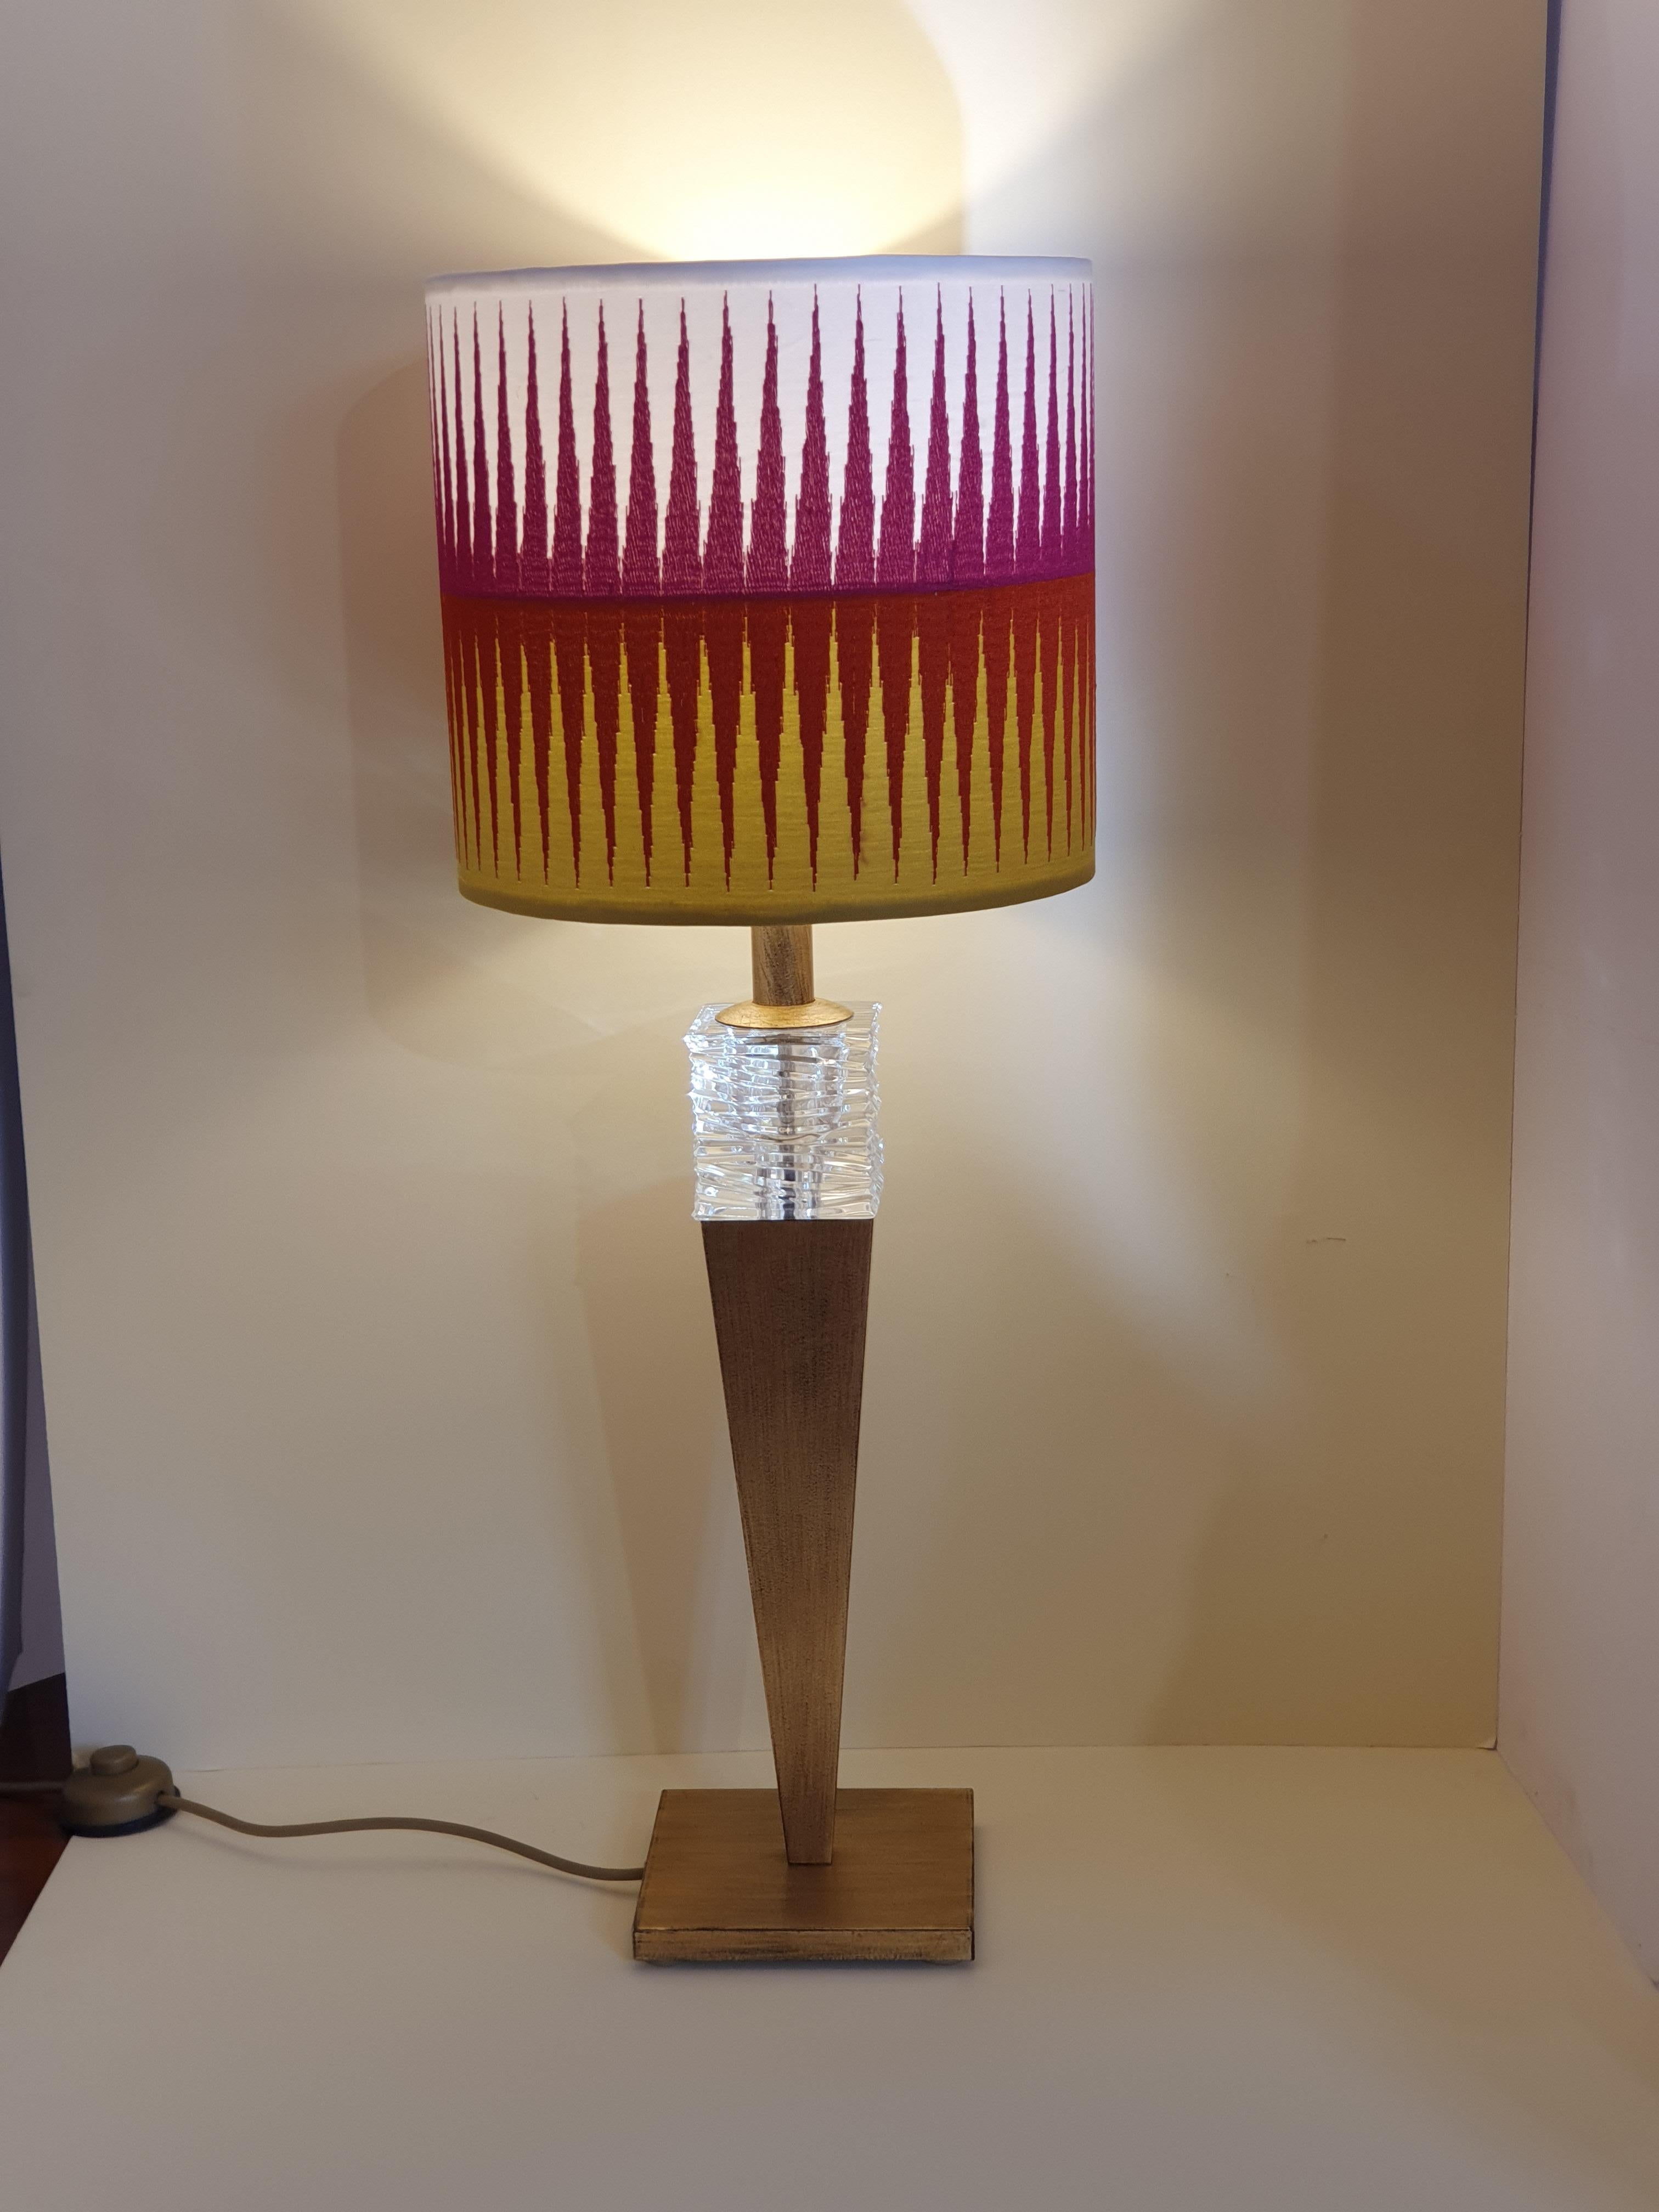 Gorgeous handcrafted lamp in gilded iron and crystal, shown here with a lampshade made with Pierre Frey fabric. Led system in the crystal.
During the last 120 years, Banci pursued the vision to change and influence people's hearts and spirits